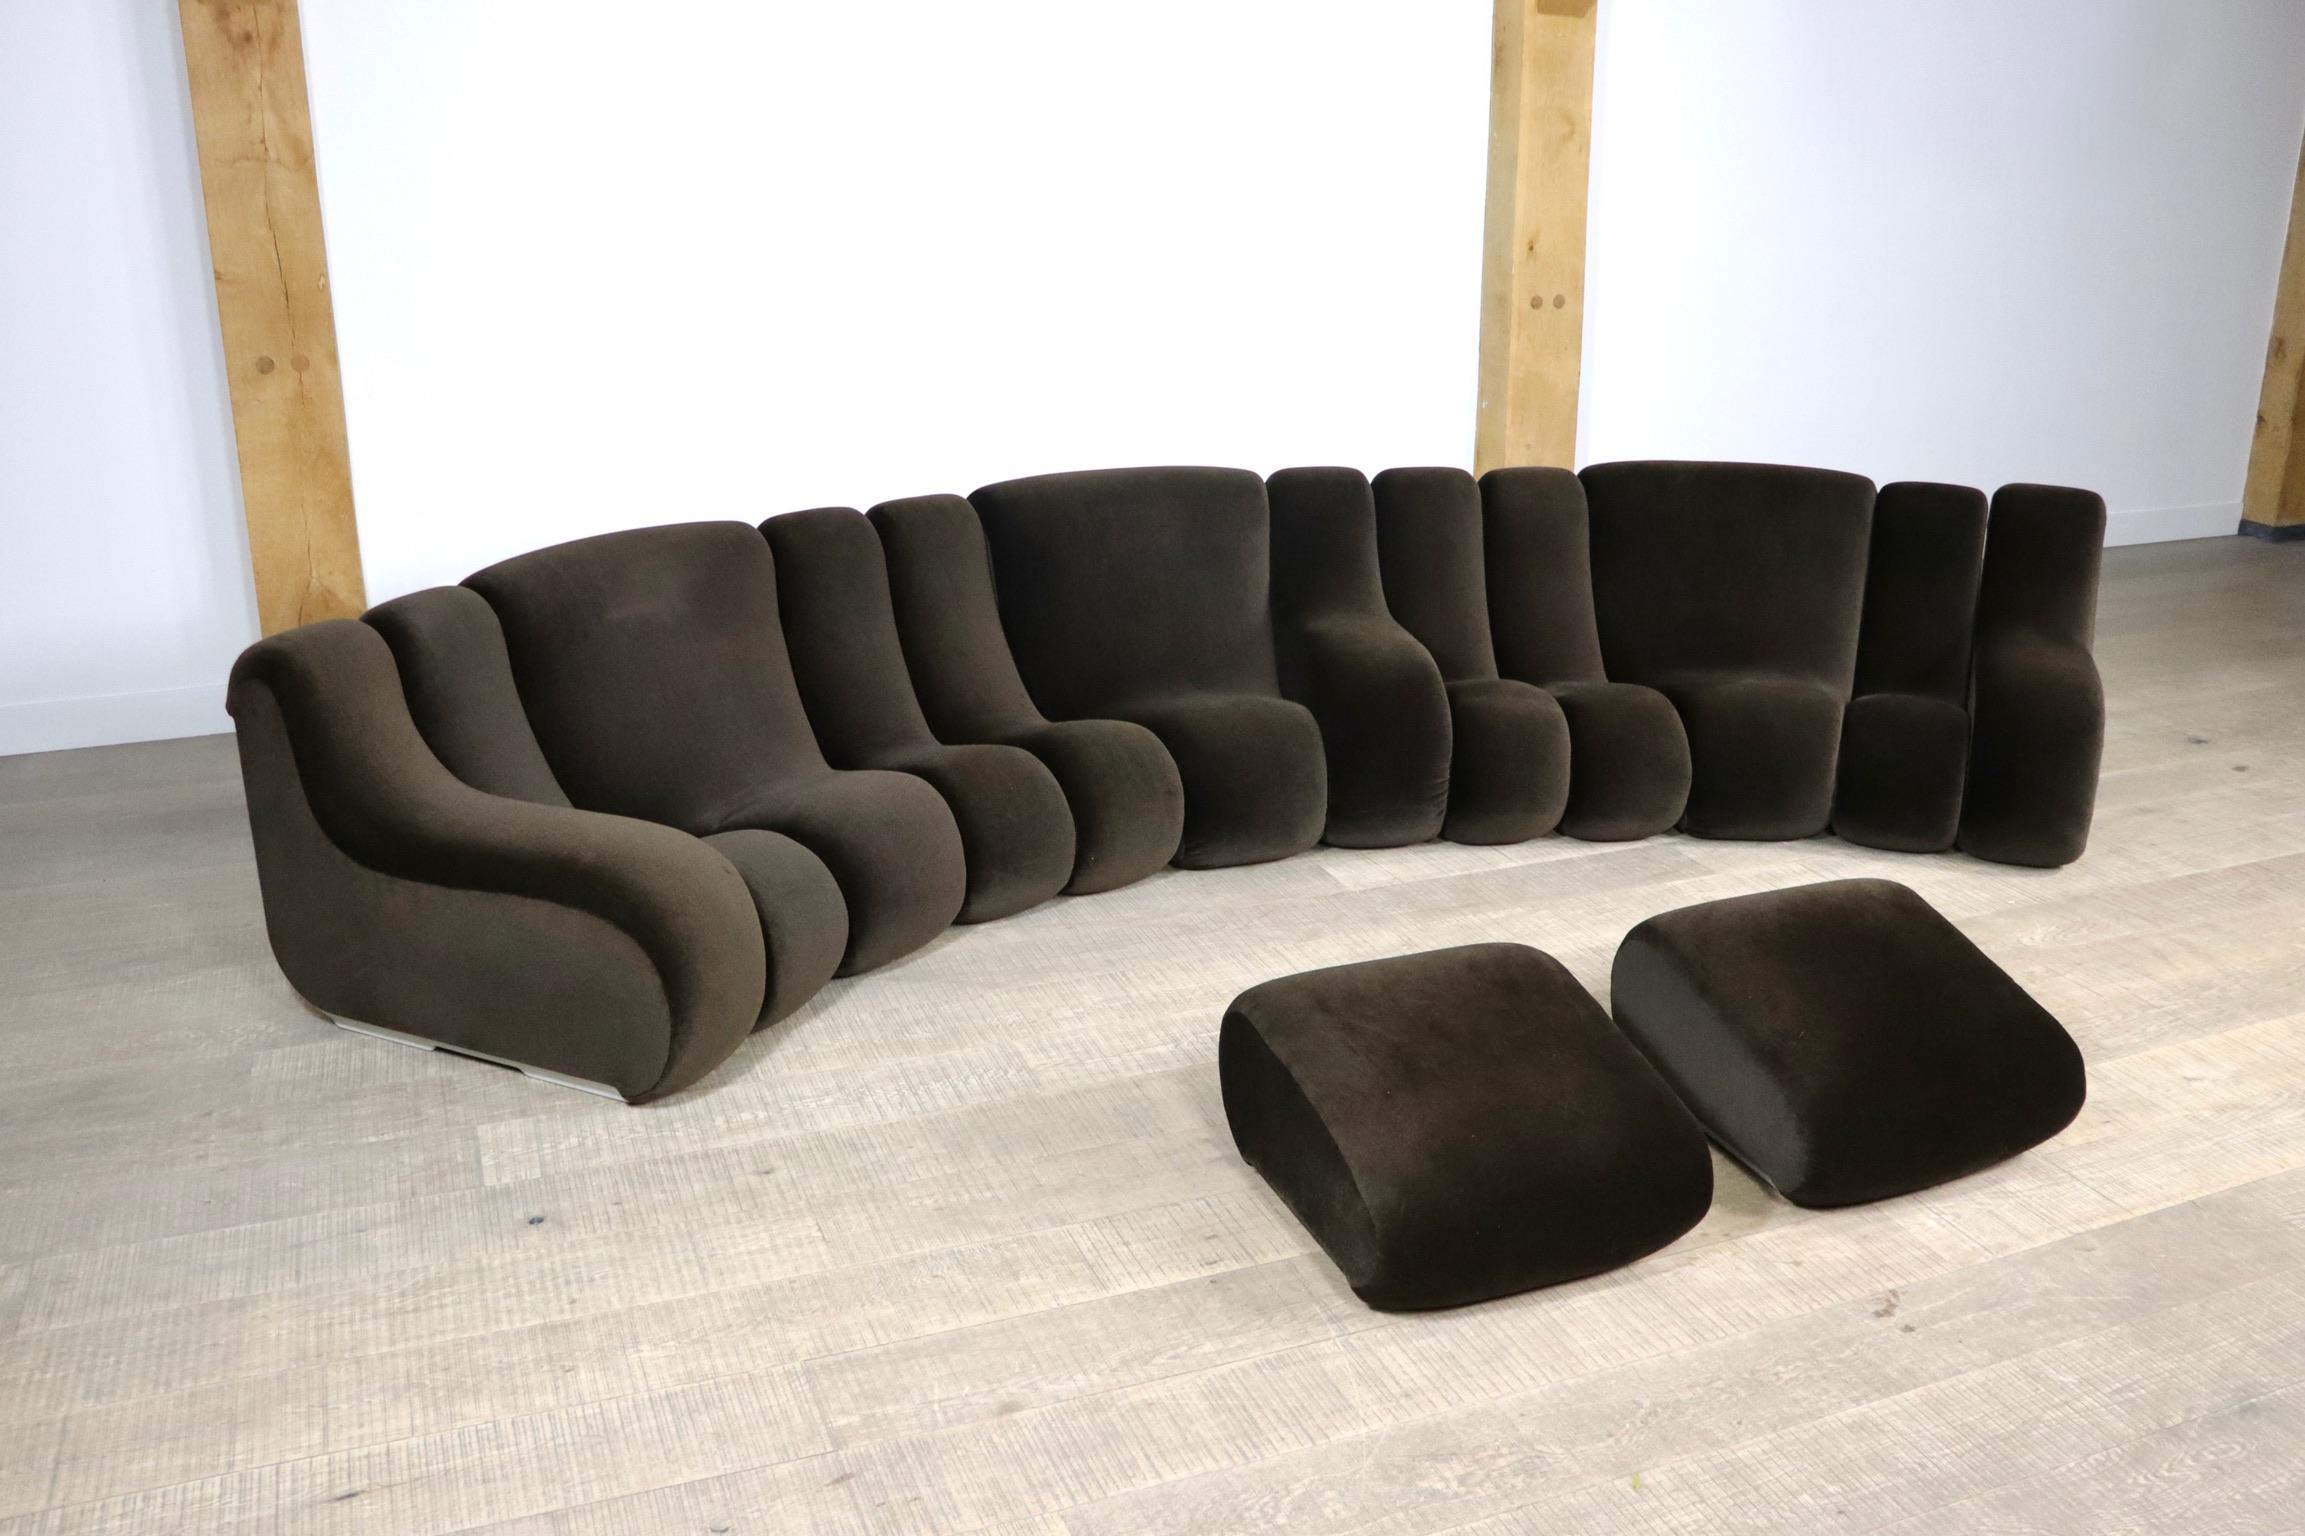 Extremely rare Vario Pillo modular sofa by Burkhard Vogtherr for Rosenthal, Germany, 1970s. 
The sofa consists out of 12 seating elements and two ottomans. The beautiful original dark brown mohair velvet upholstery combines nicely with the white